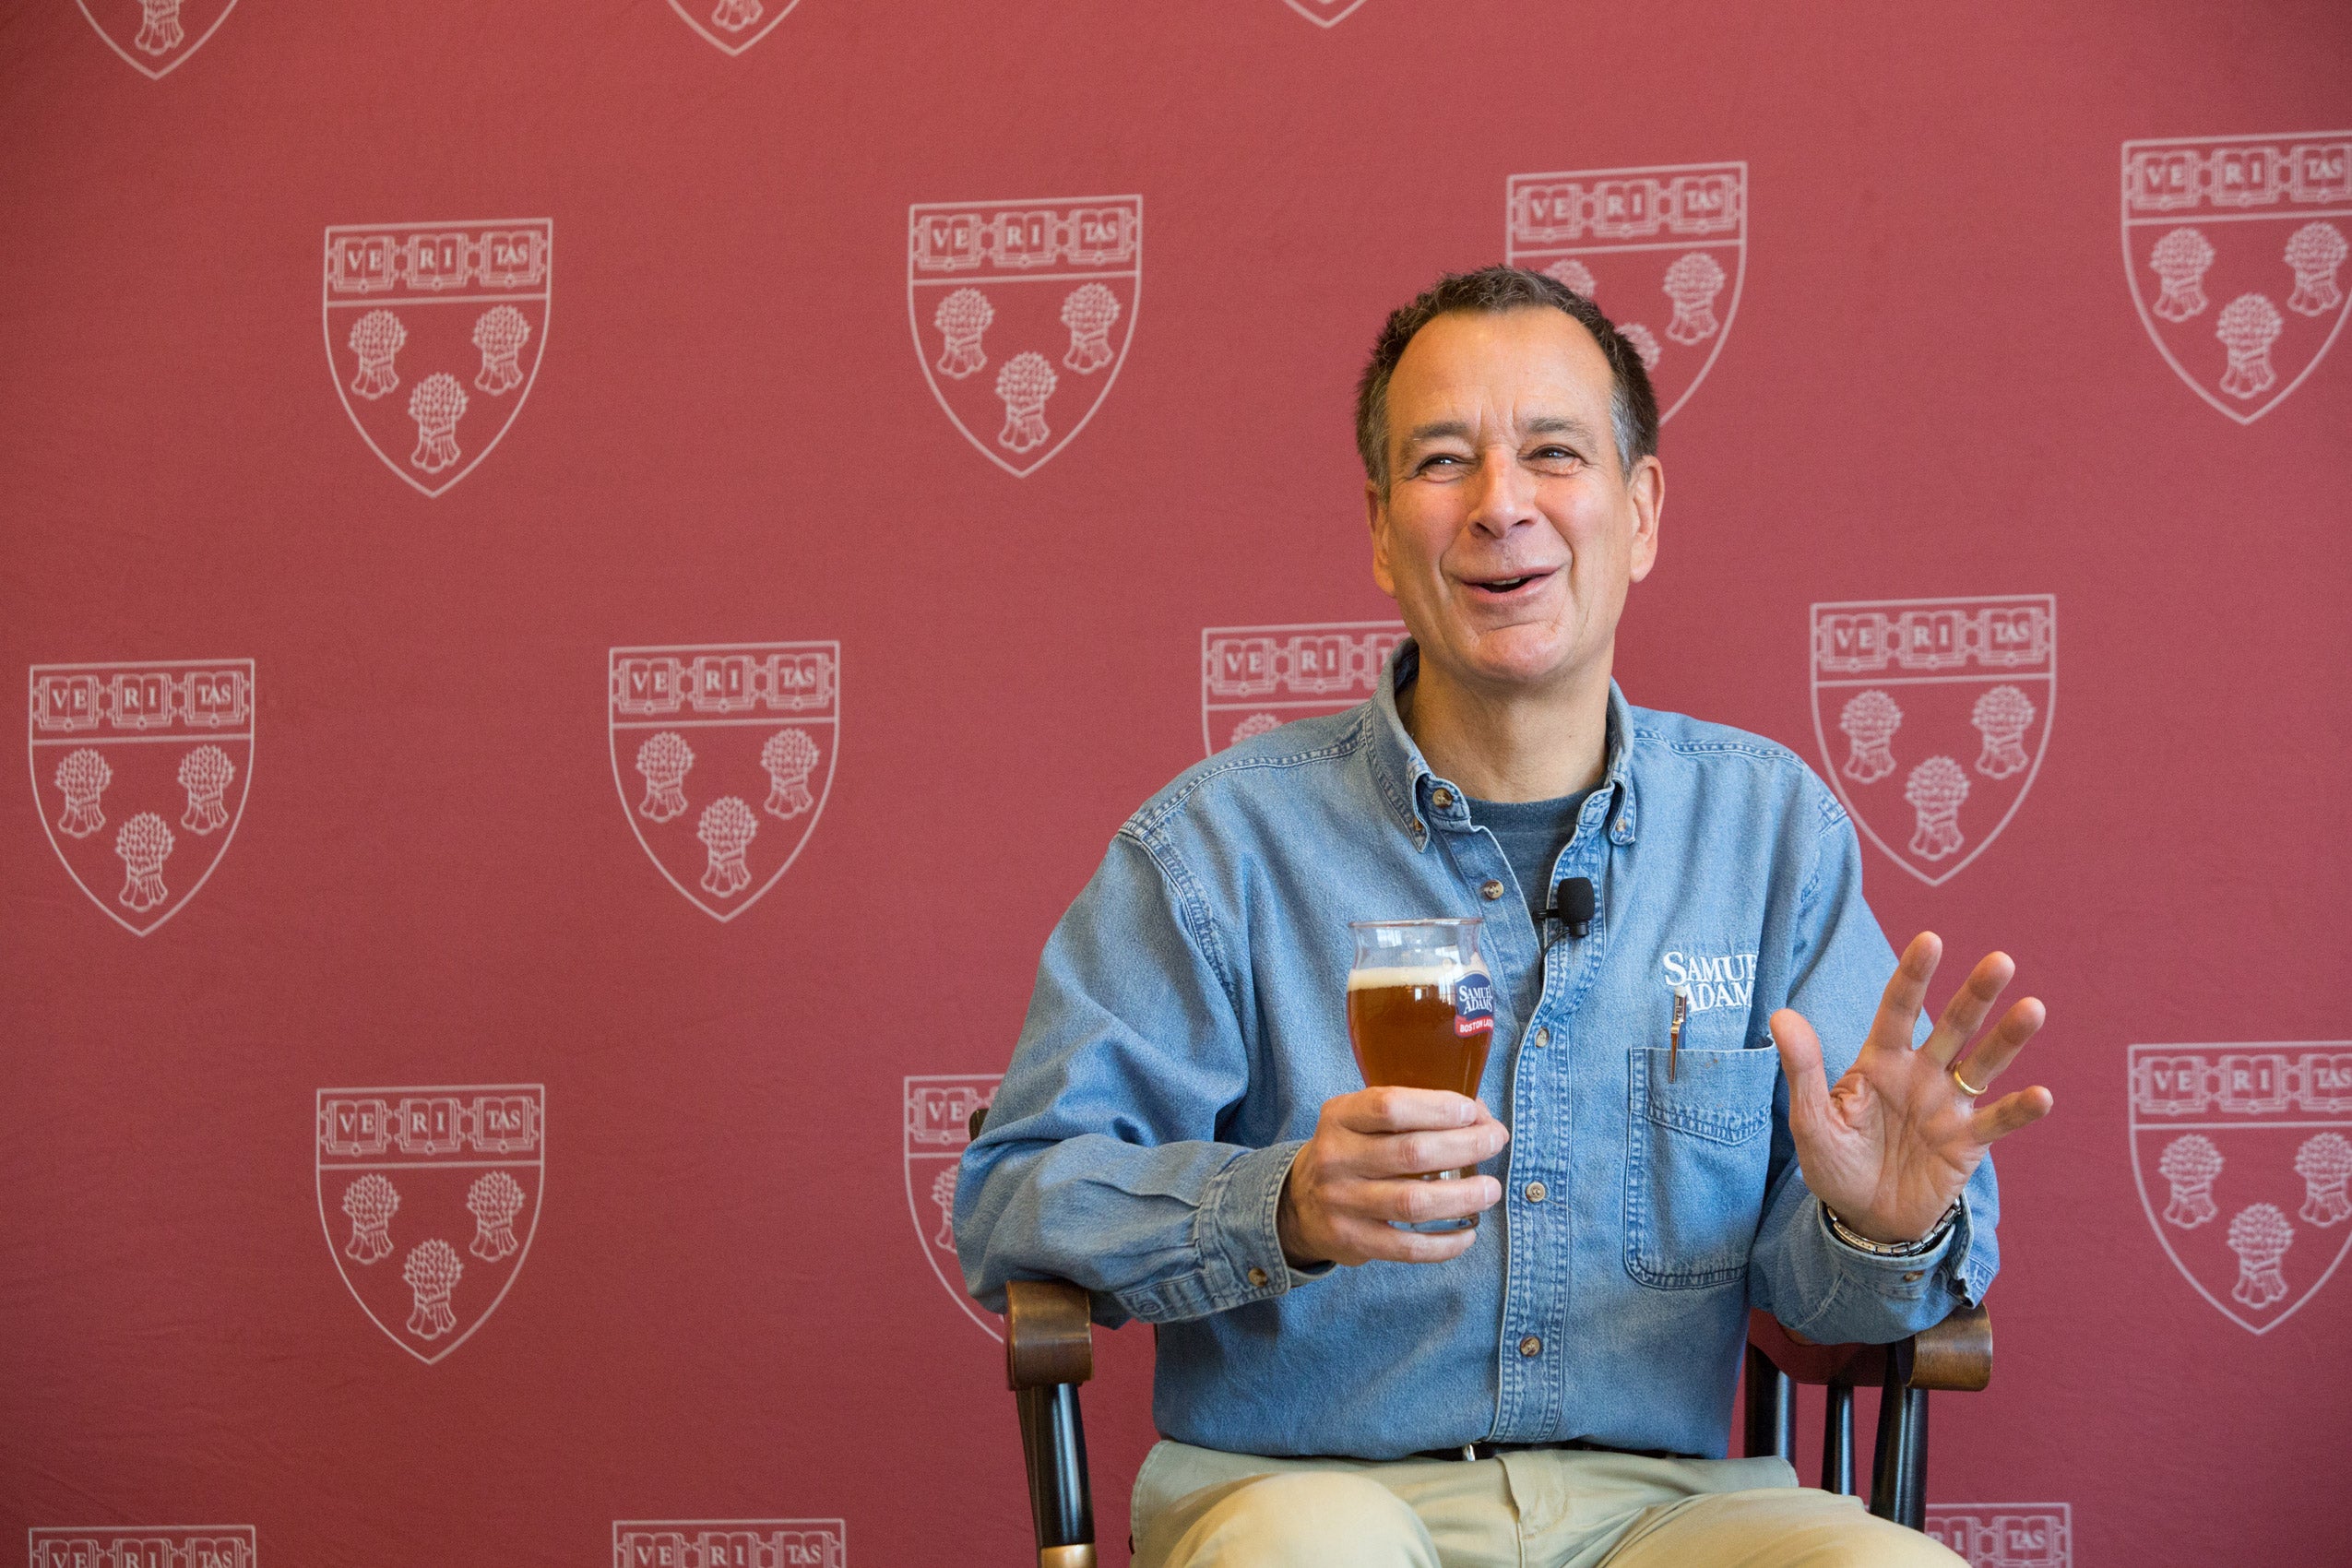 Jim Koch speaking against a Harvard backdrop with a glass of beer in his hand